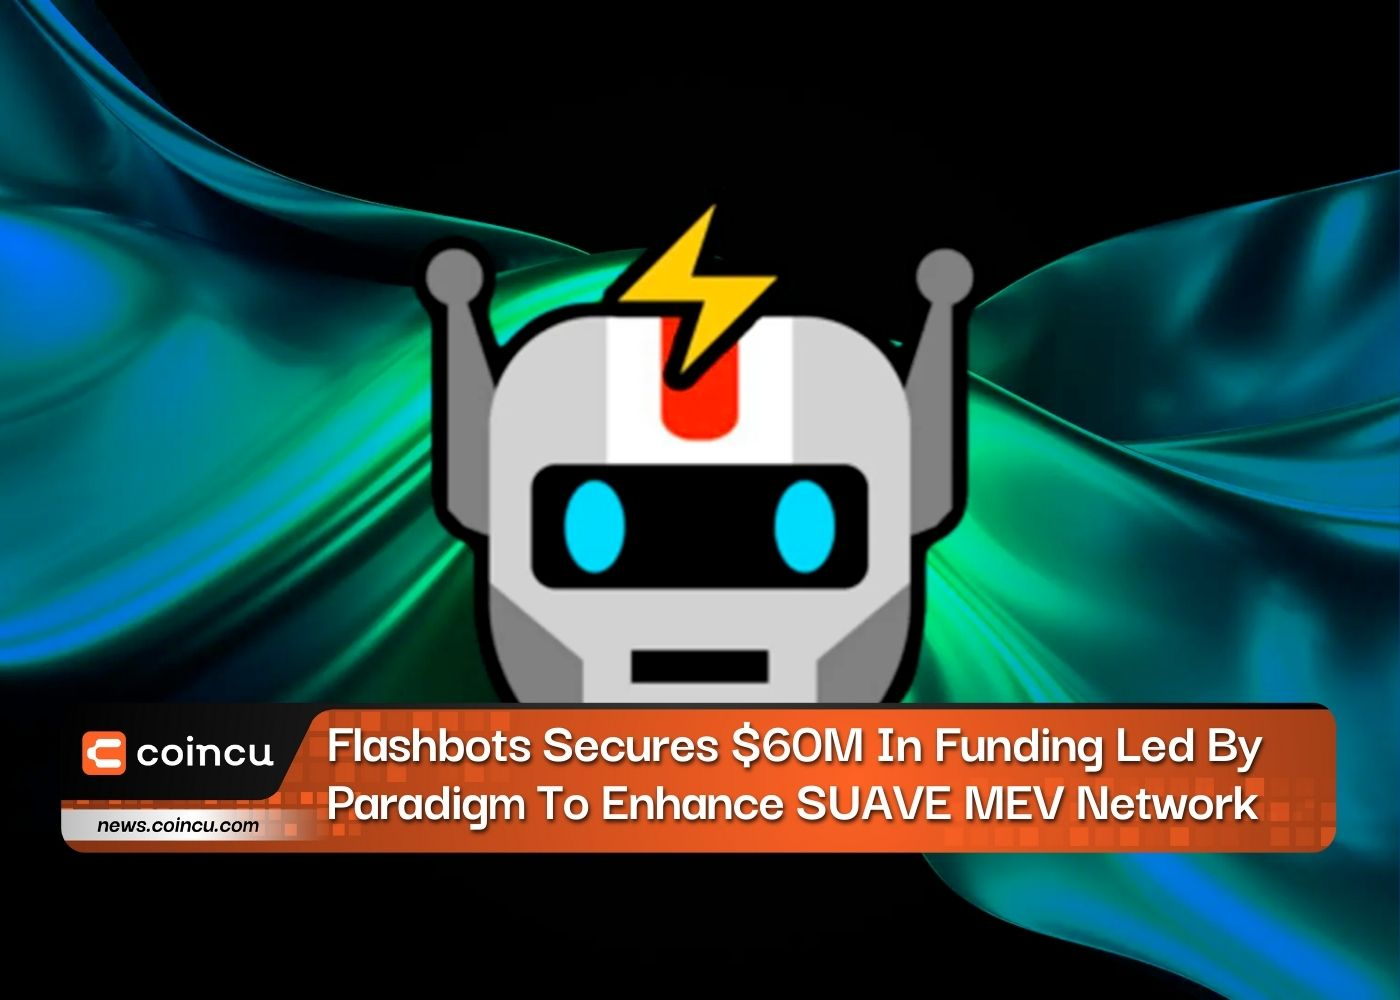 Flashbots Secures $60M In Funding Led By Paradigm To Enhance SUAVE MEV Network